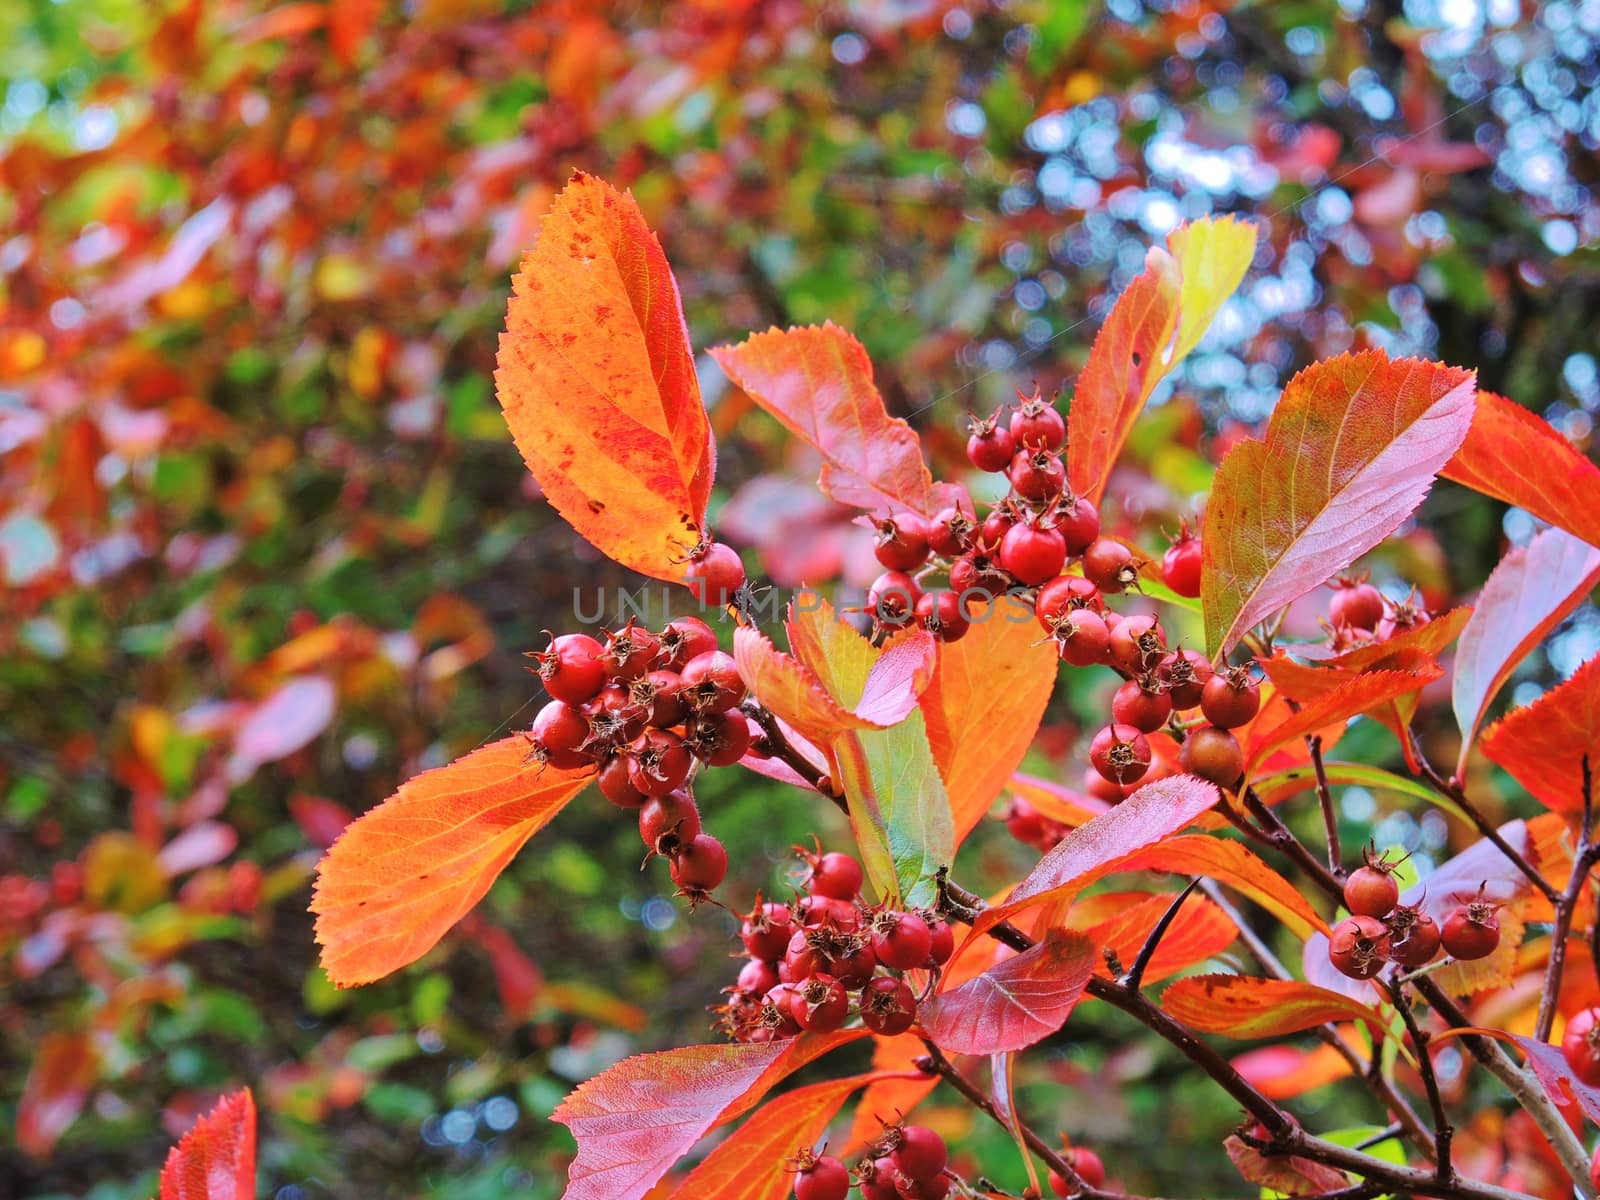 A close-up image of colourful Autumn leaves and red berries.